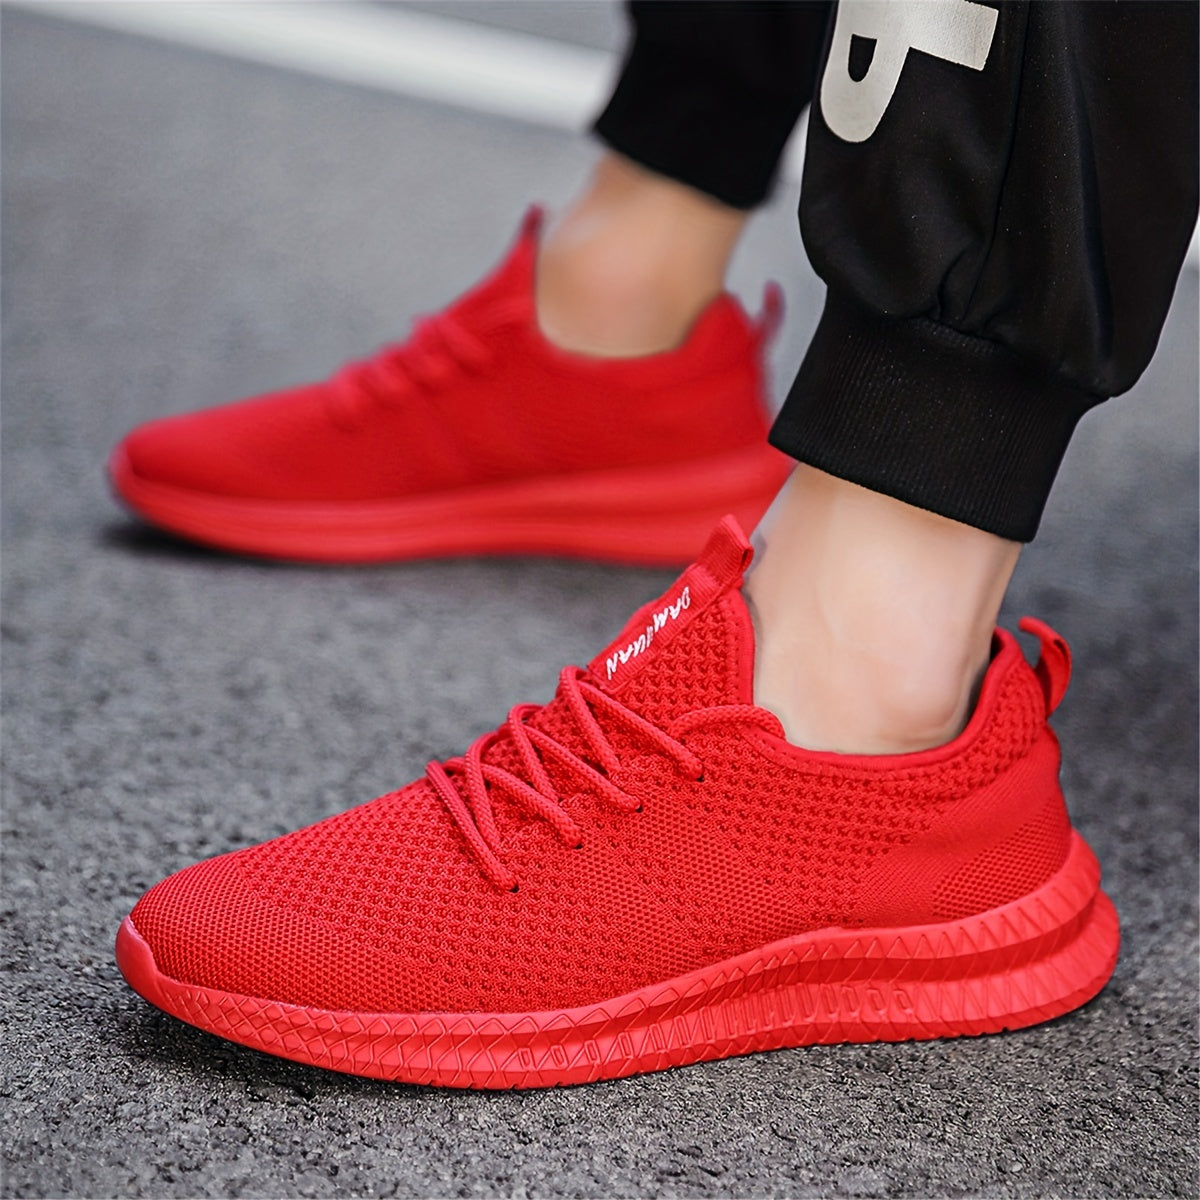 Men's Running Shoes Knit Breathable Lightweight Running Shoes Couple Outdoor Athletic Walking Sneakers, Spring And Summer